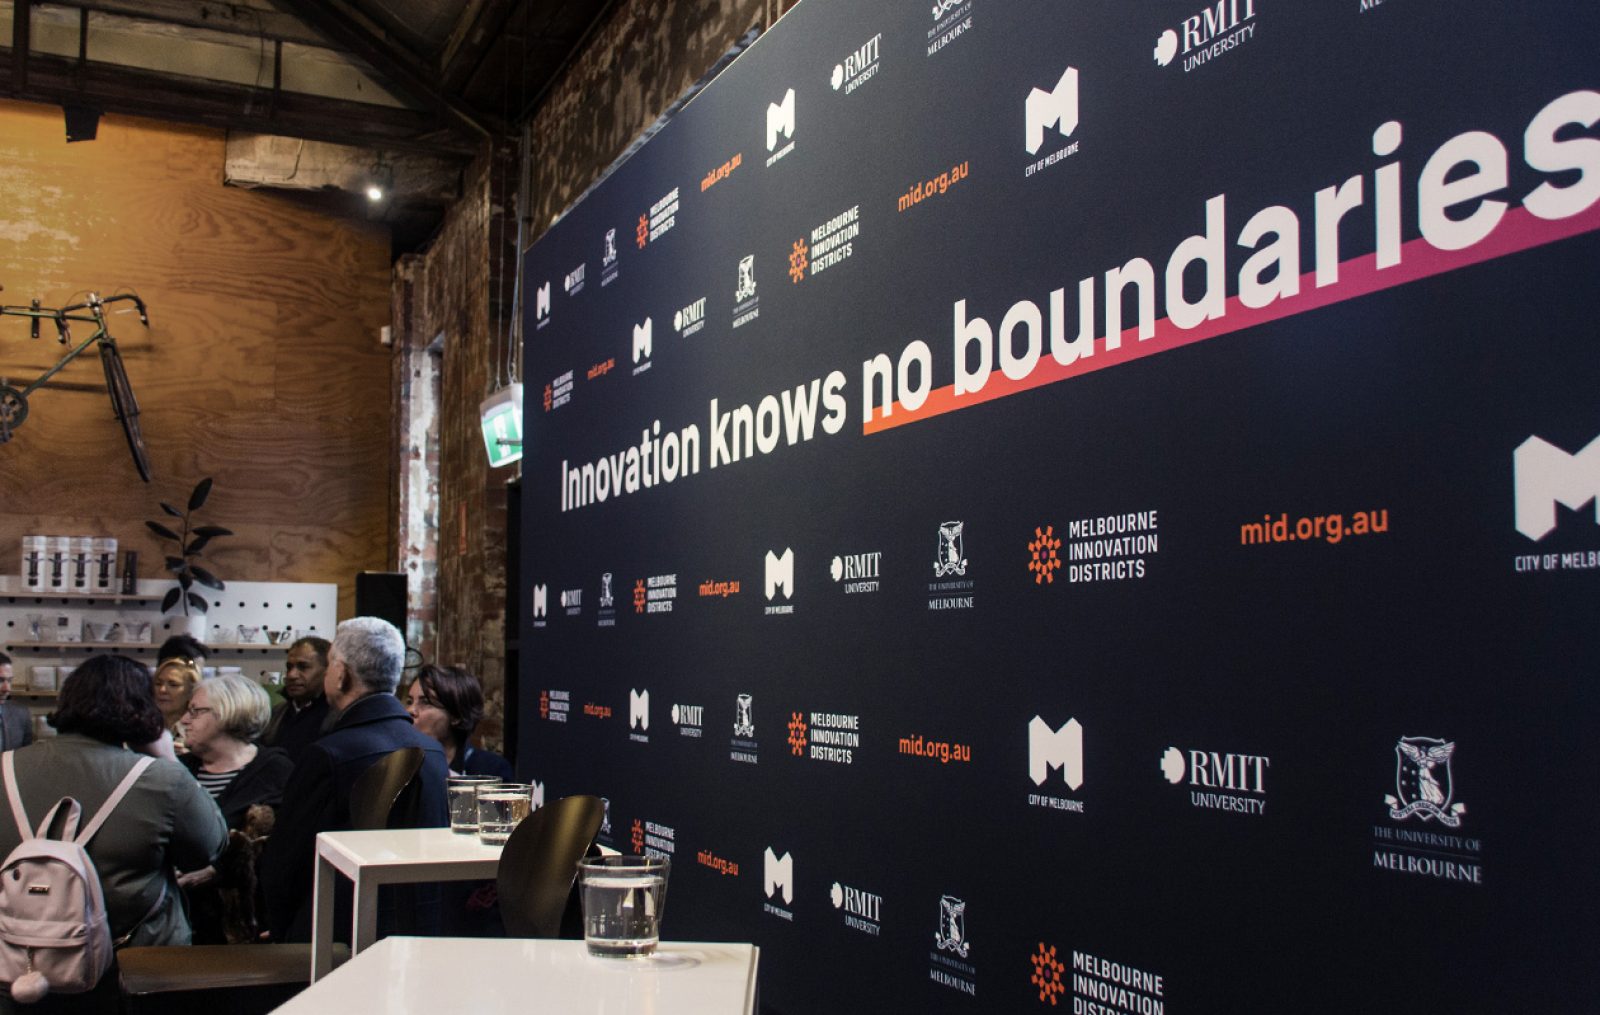 A co-branded media wall with the headline "Innovation Knows no Boundaries" and the logos of the MID, the City of Melbourne, RMIT University and the University of Melbourne